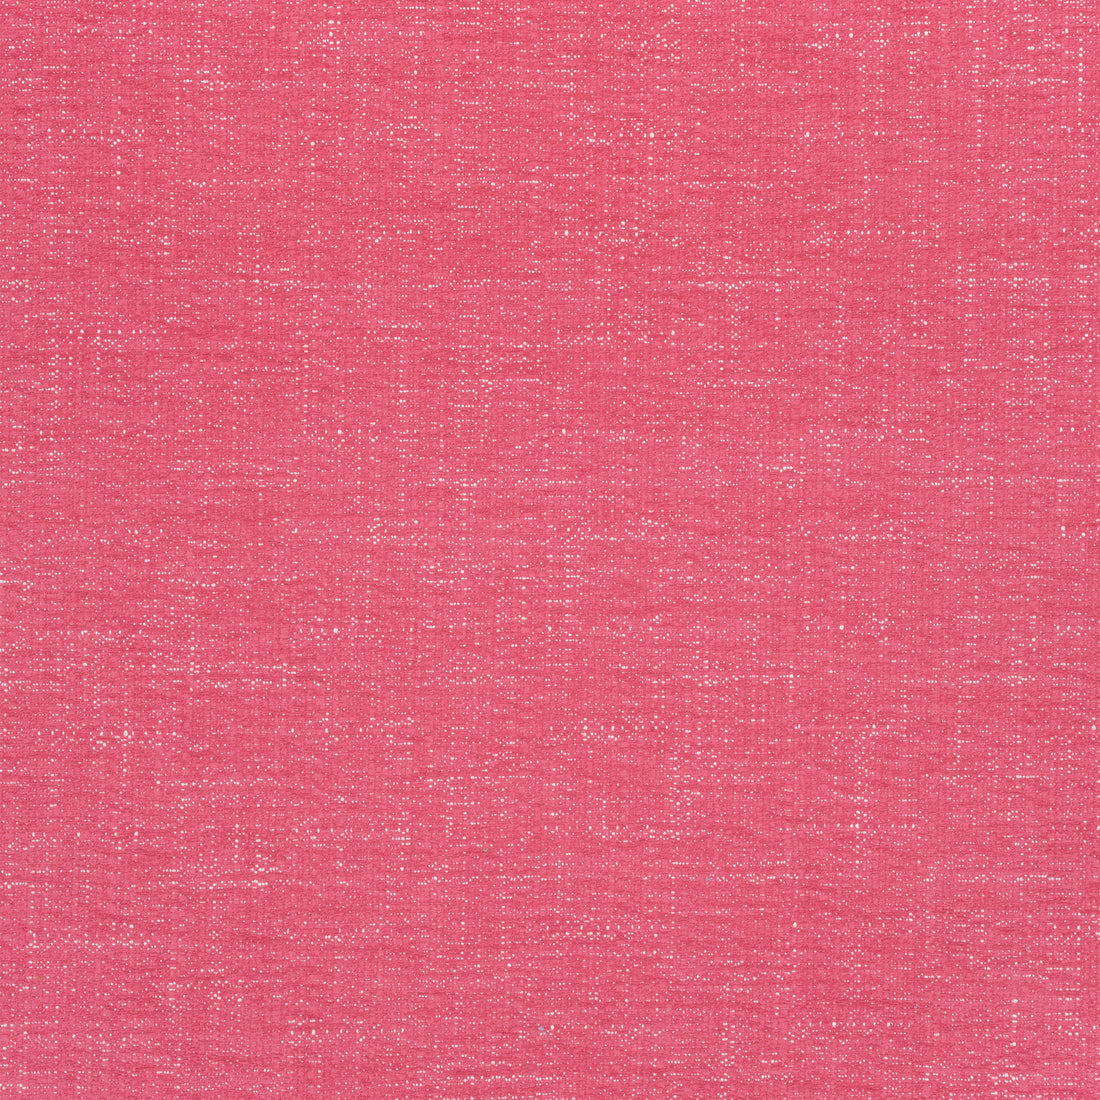 Vista fabric in peony color - pattern number W73381 - by Thibaut in the Landmark Textures collection